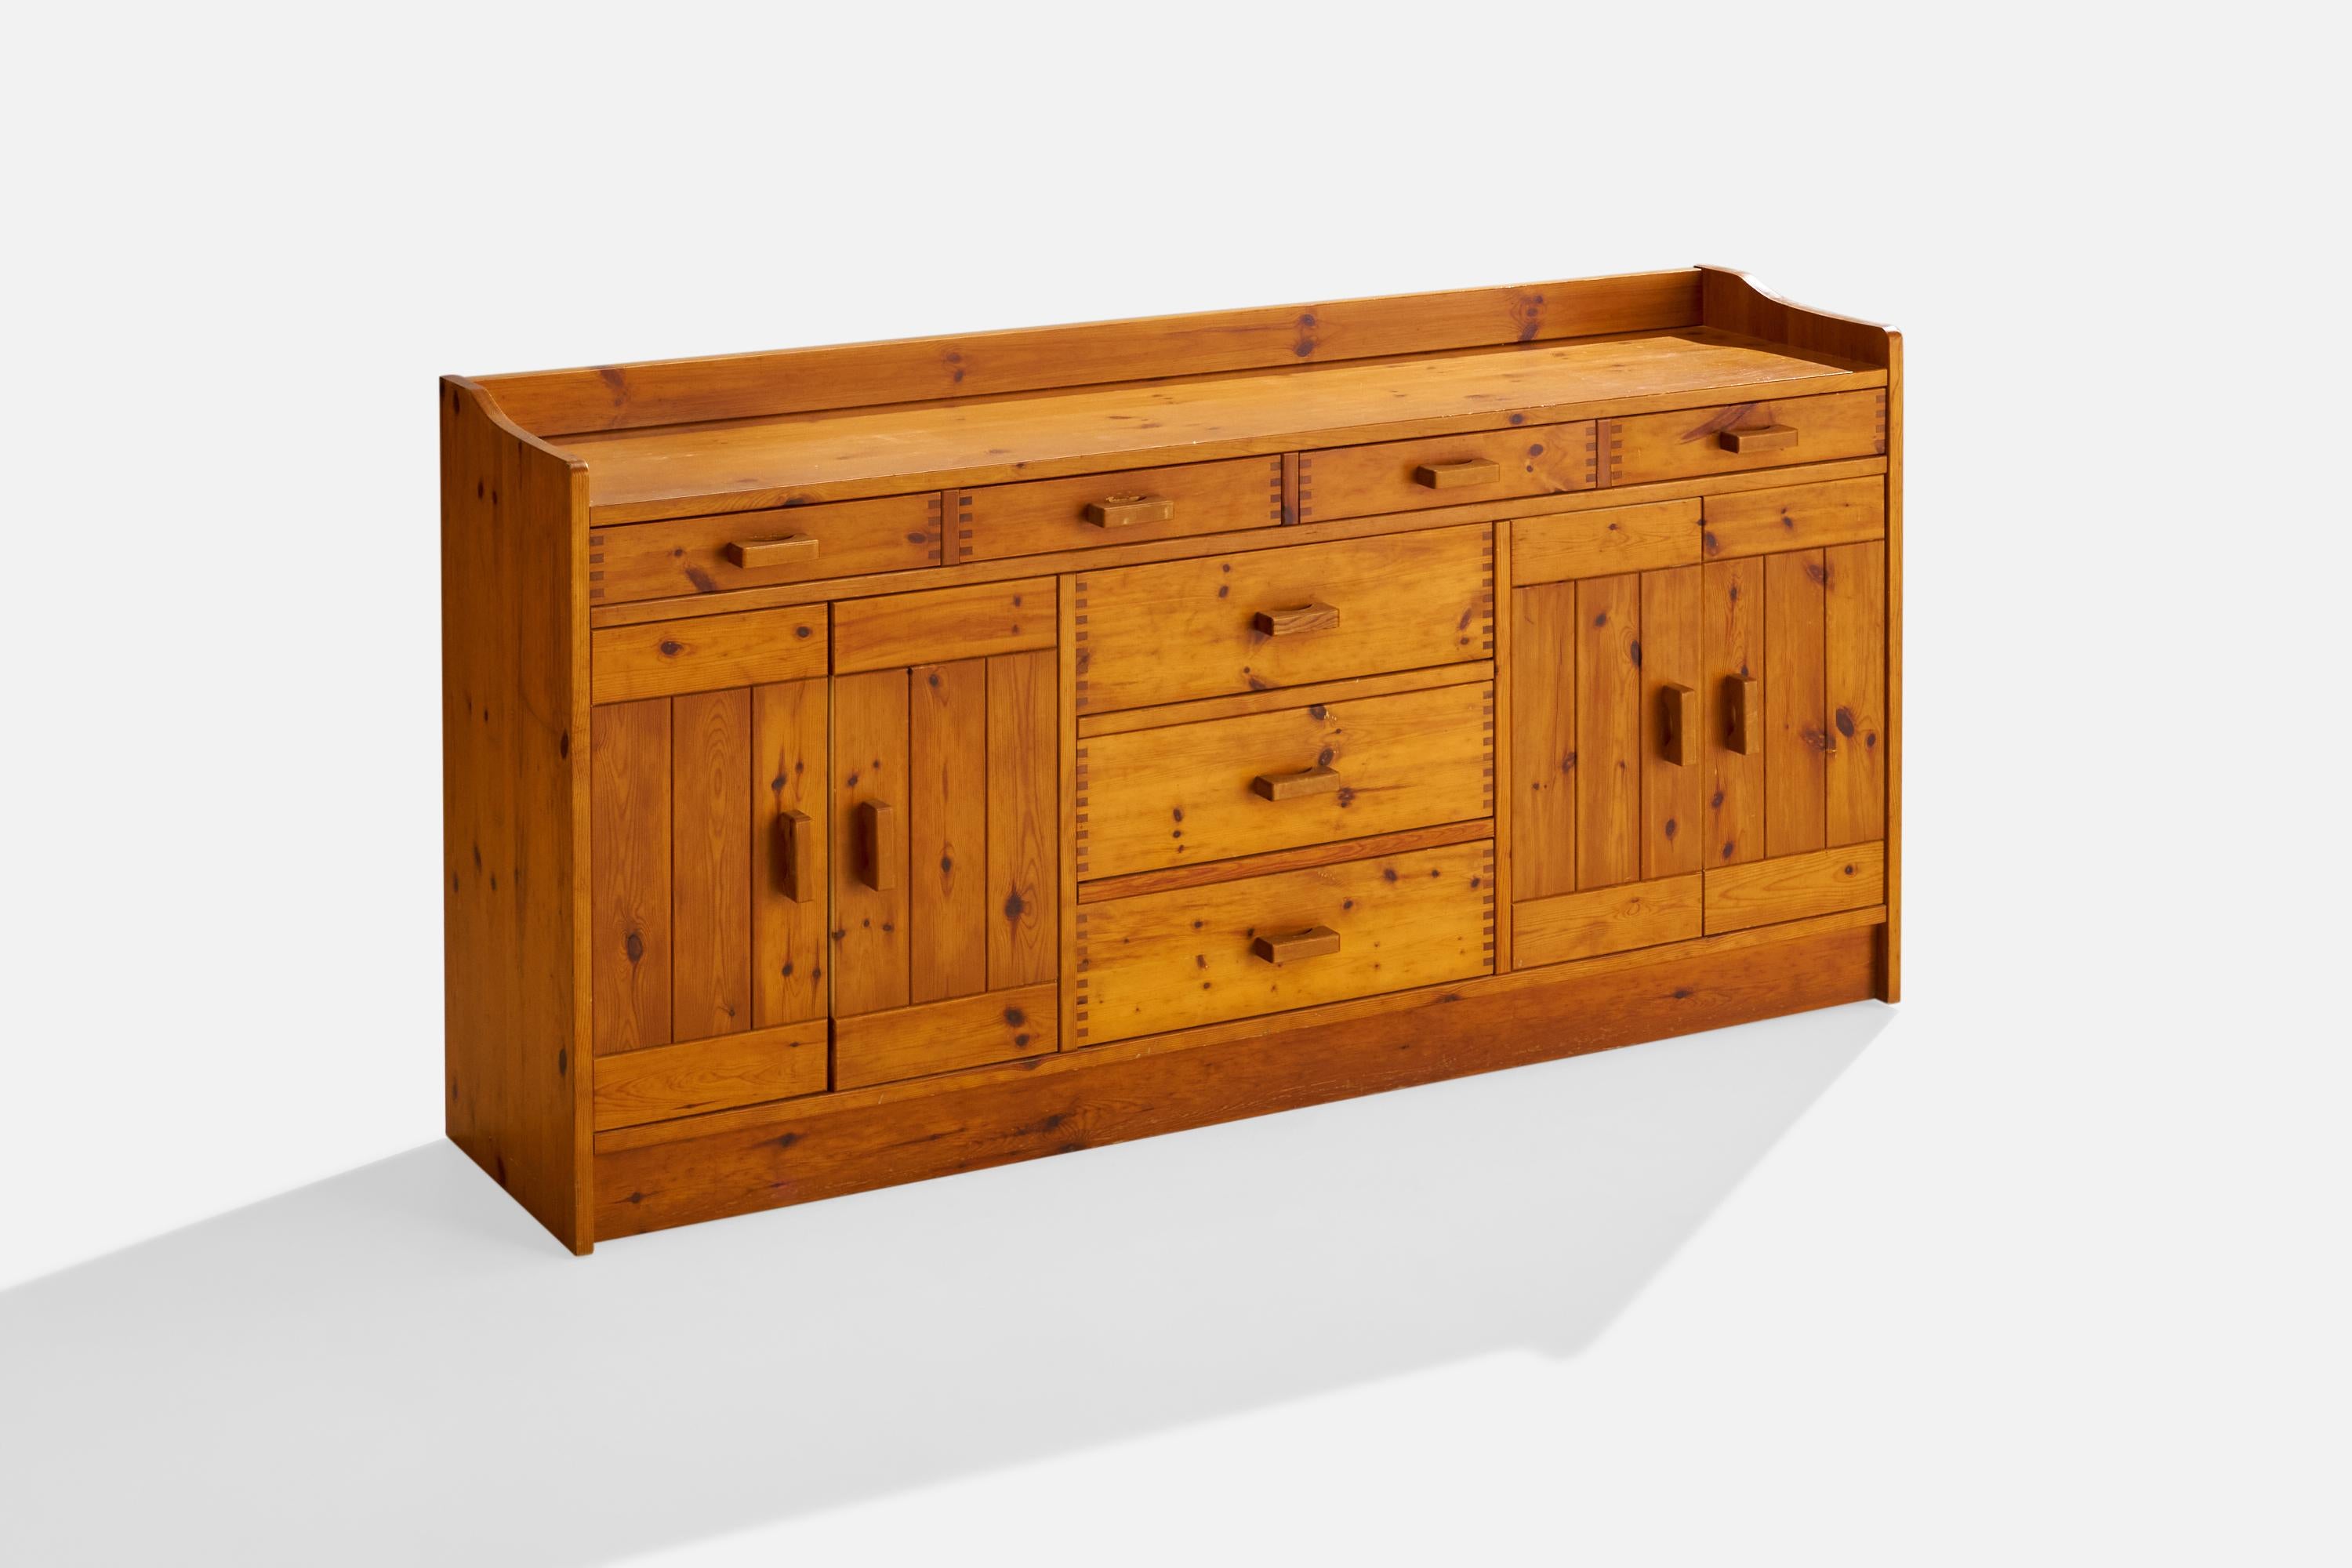 A pine cabinet or sideboard designed and produced in Denmark, c. 1970s.